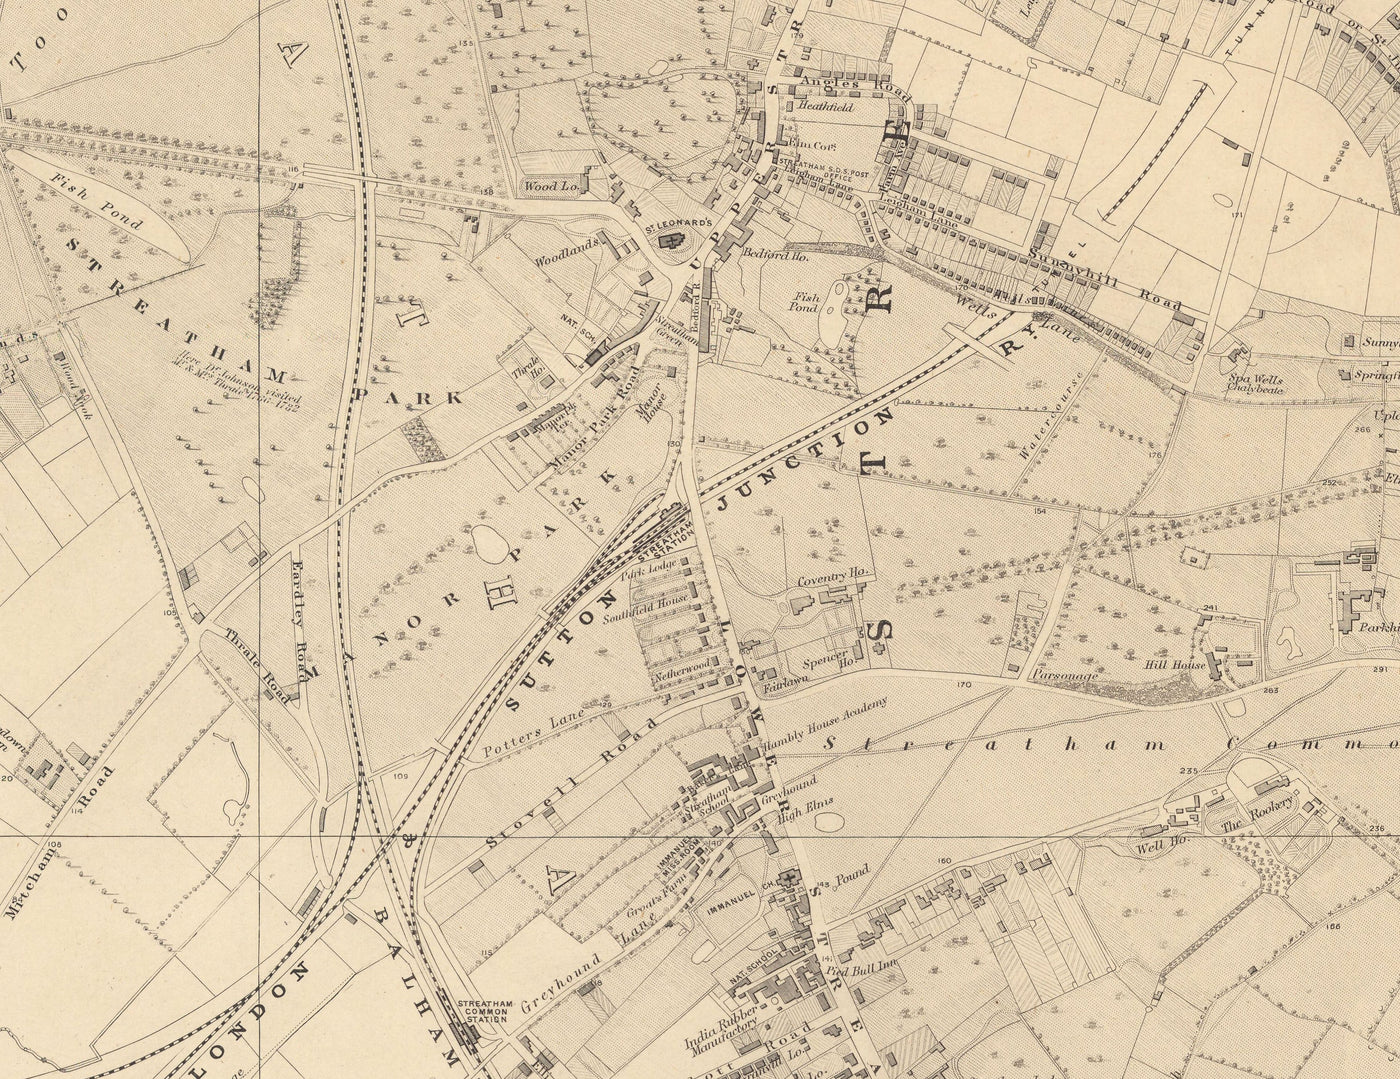 Old Map of South London in 1862 by Edward Stanford - Streatham, Tooting, Mitcham, Norbury - SW17, SW16, CR4